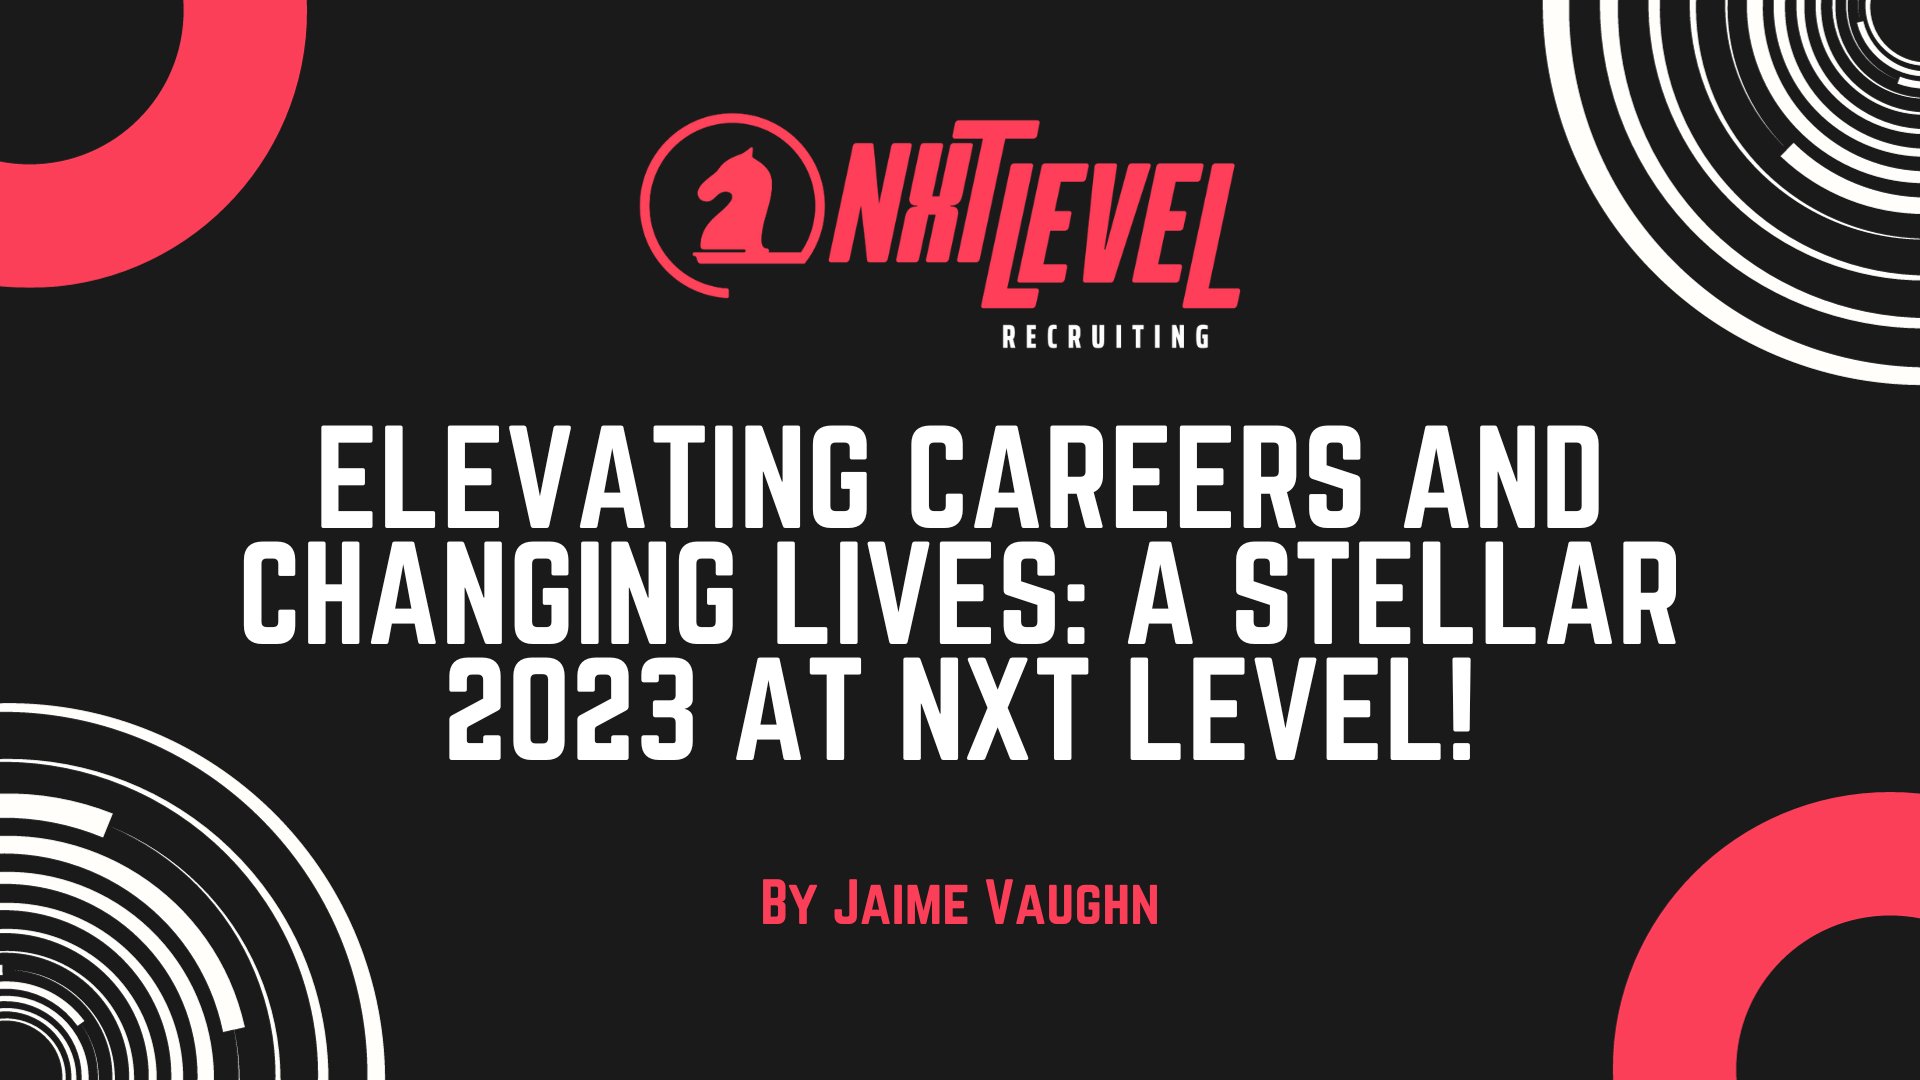 Elevating Careers and Changing Lives: A Stellar 2023 at Nxt Level!